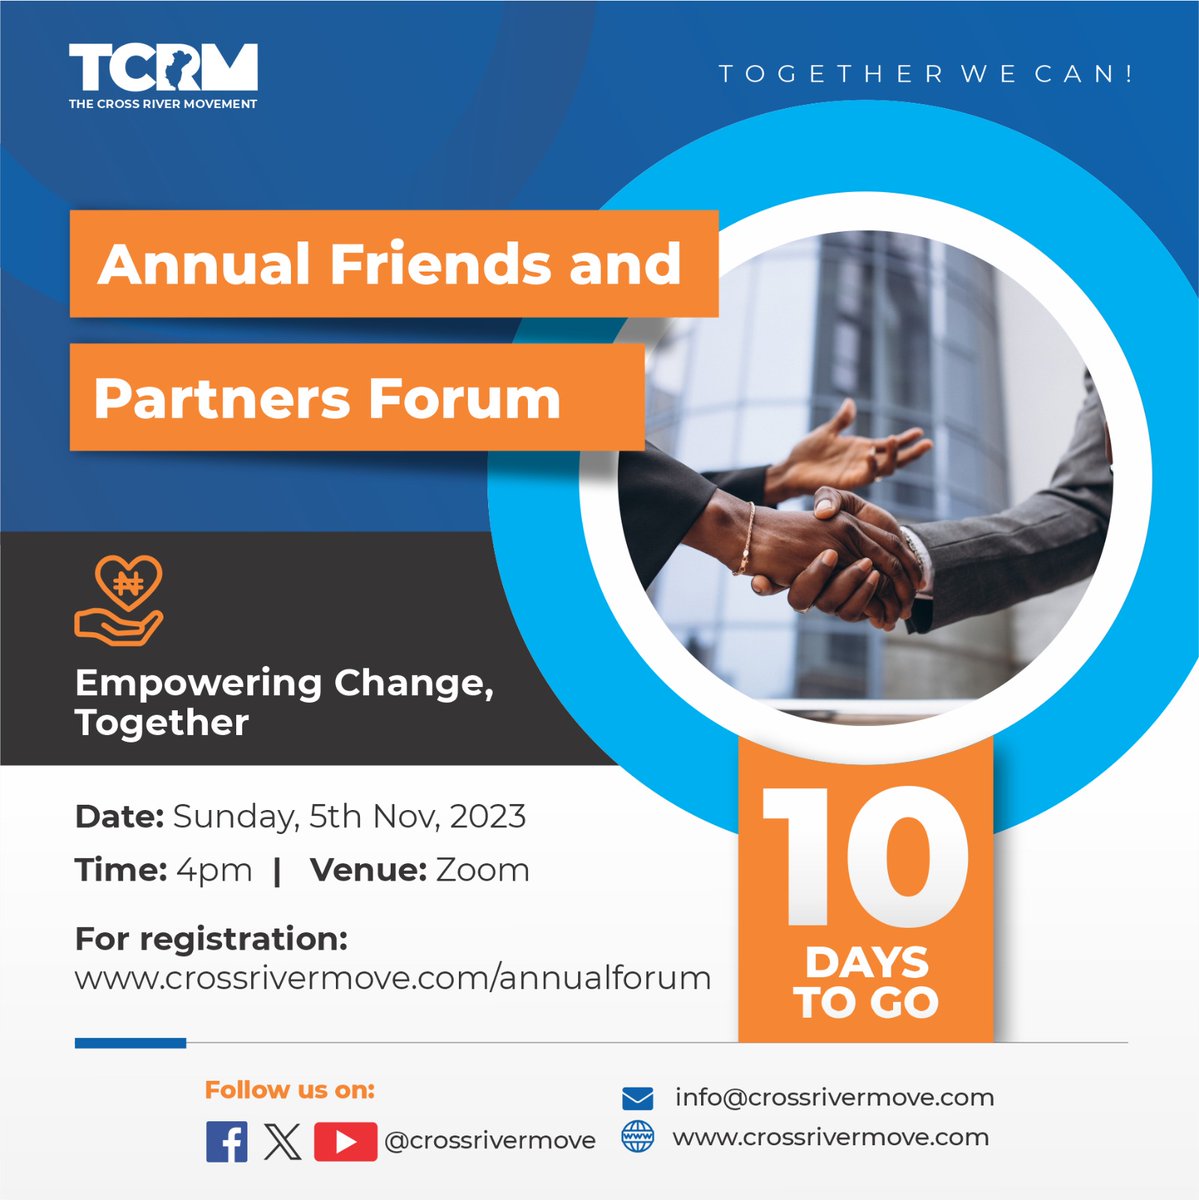 *It's 10 days to the TCRM Annual Friends and Partners Forum*
This is  a calling for all Crossriverians and lovers of Cross River to this Special Occasion 

*Theme: Empowering Change Together*

#TCRM #TheCrossriverMovement #GoodGovernance #CrossRiver